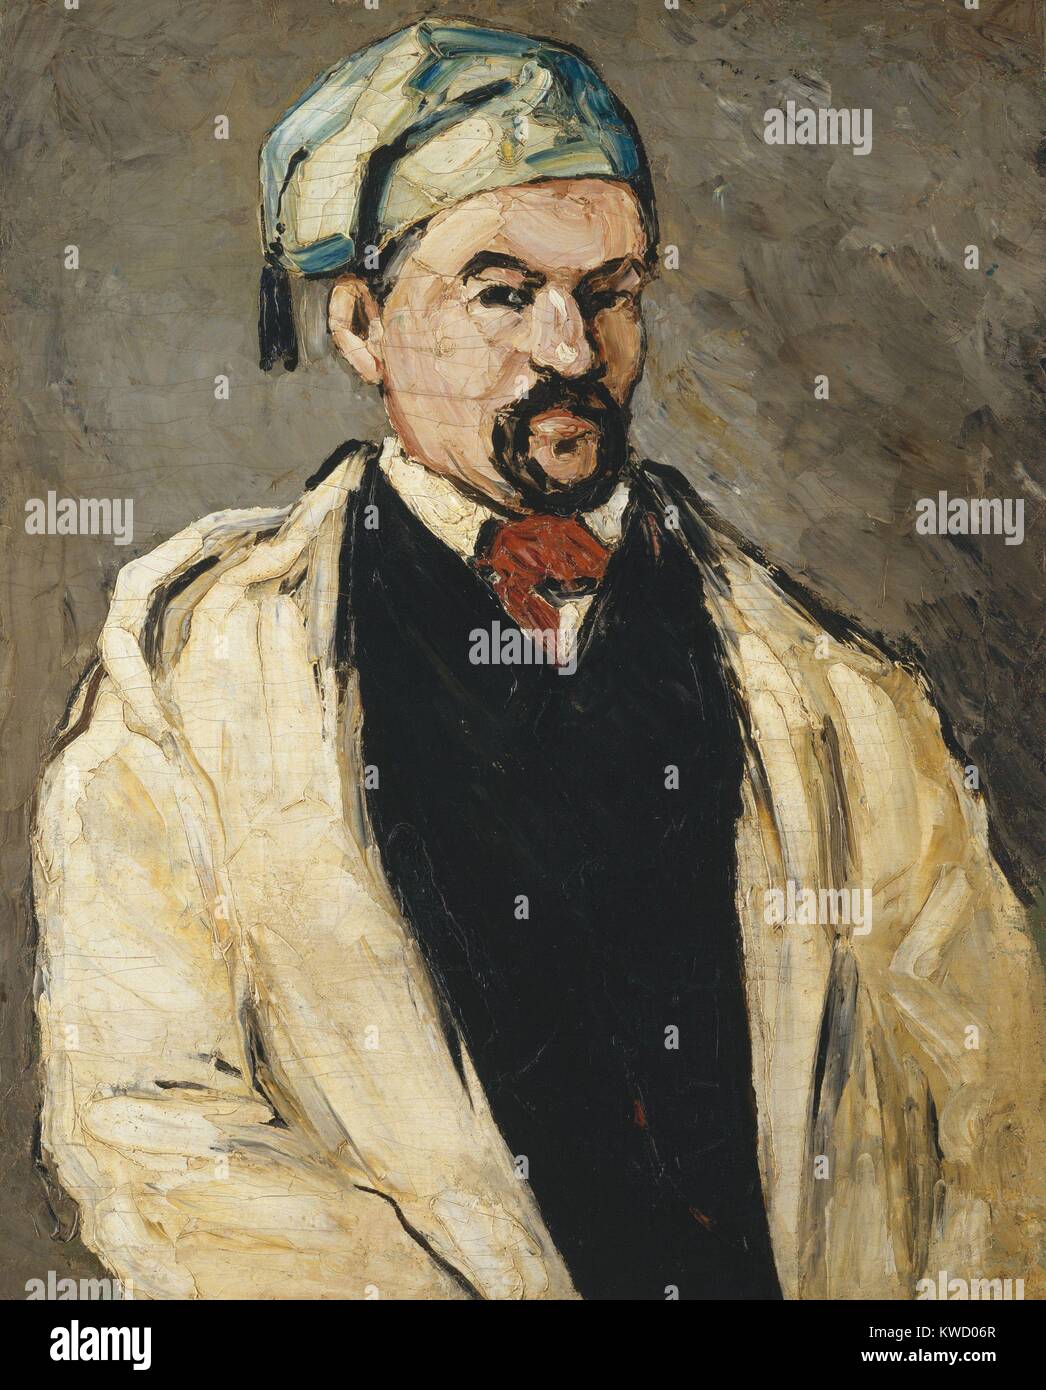 Antoine Dominique Sauveur Aubert, by Paul Cezanne, 1866, French Post-Impressionist oil painting. Cezanne painted his maternal uncle, Dominique Aubert, in different costumes, such as this robe and tasseled blue cap (BSLOC 2017 5 13) Stock Photo